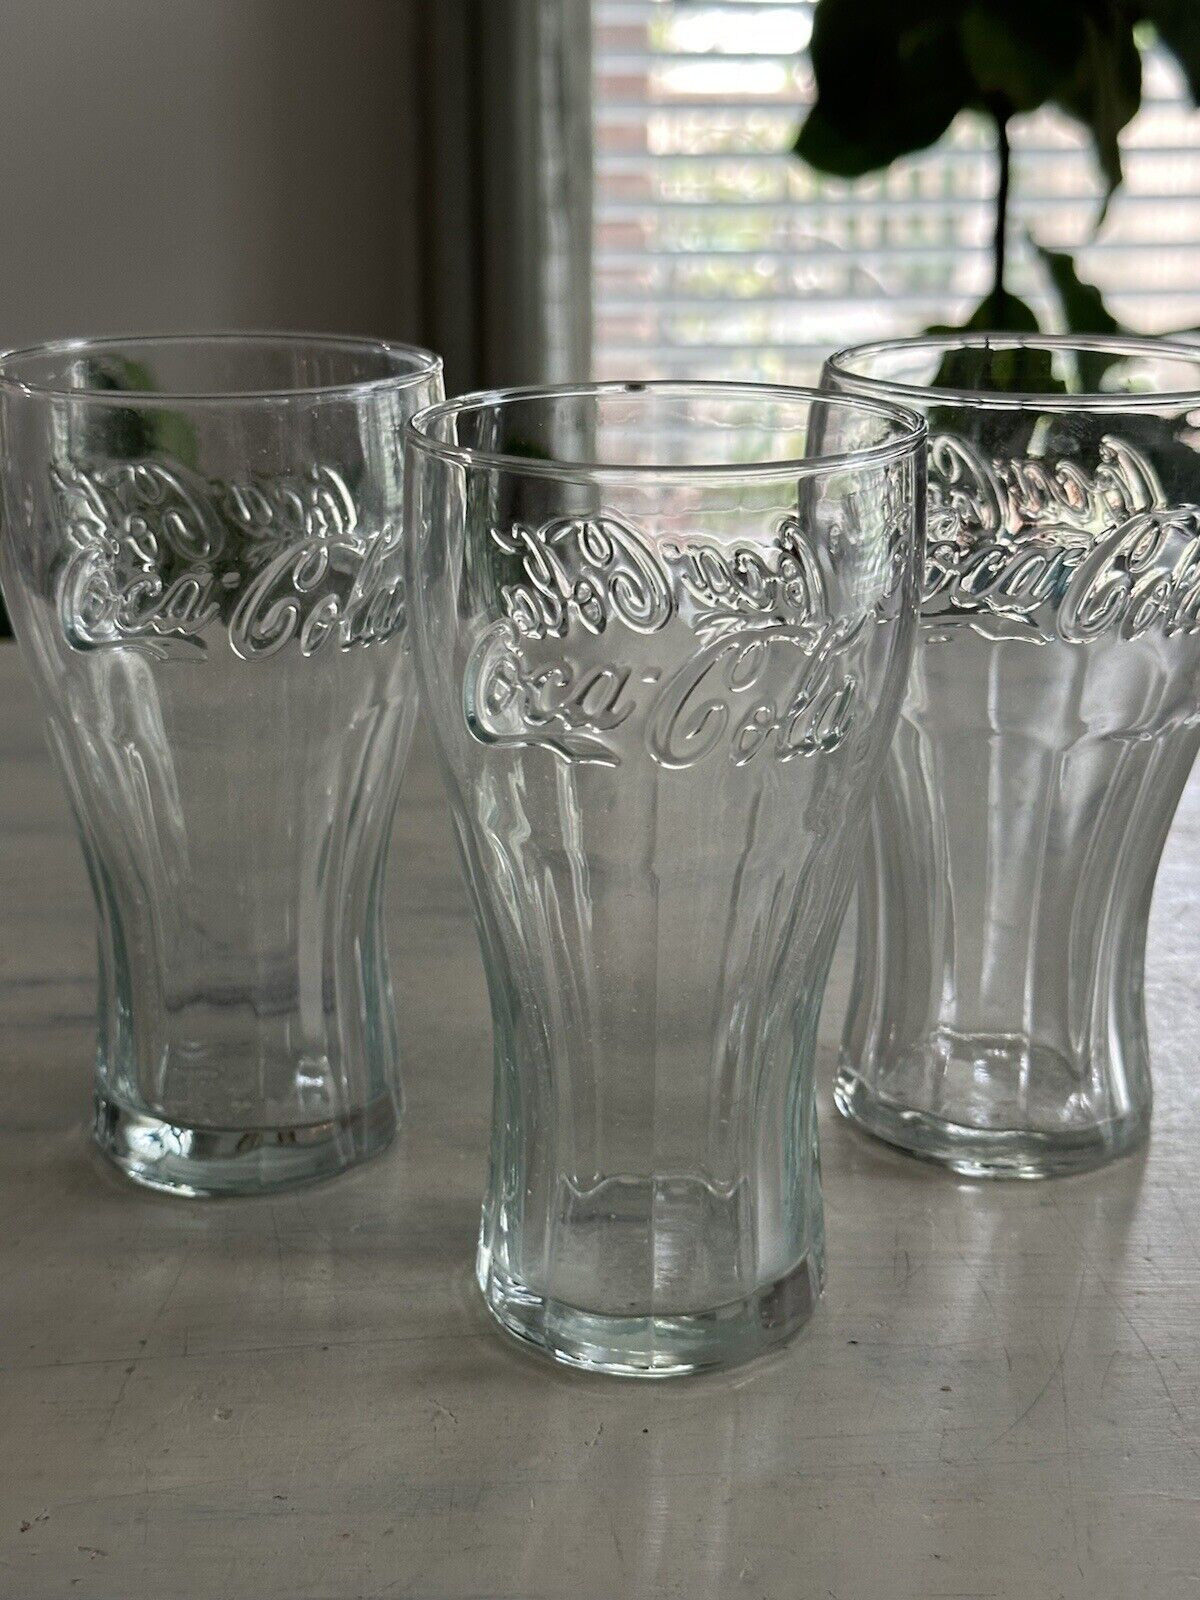 3 Vintage Coca-Cola Glasses Embossed Traditional Shape Clear Drinking Glasses